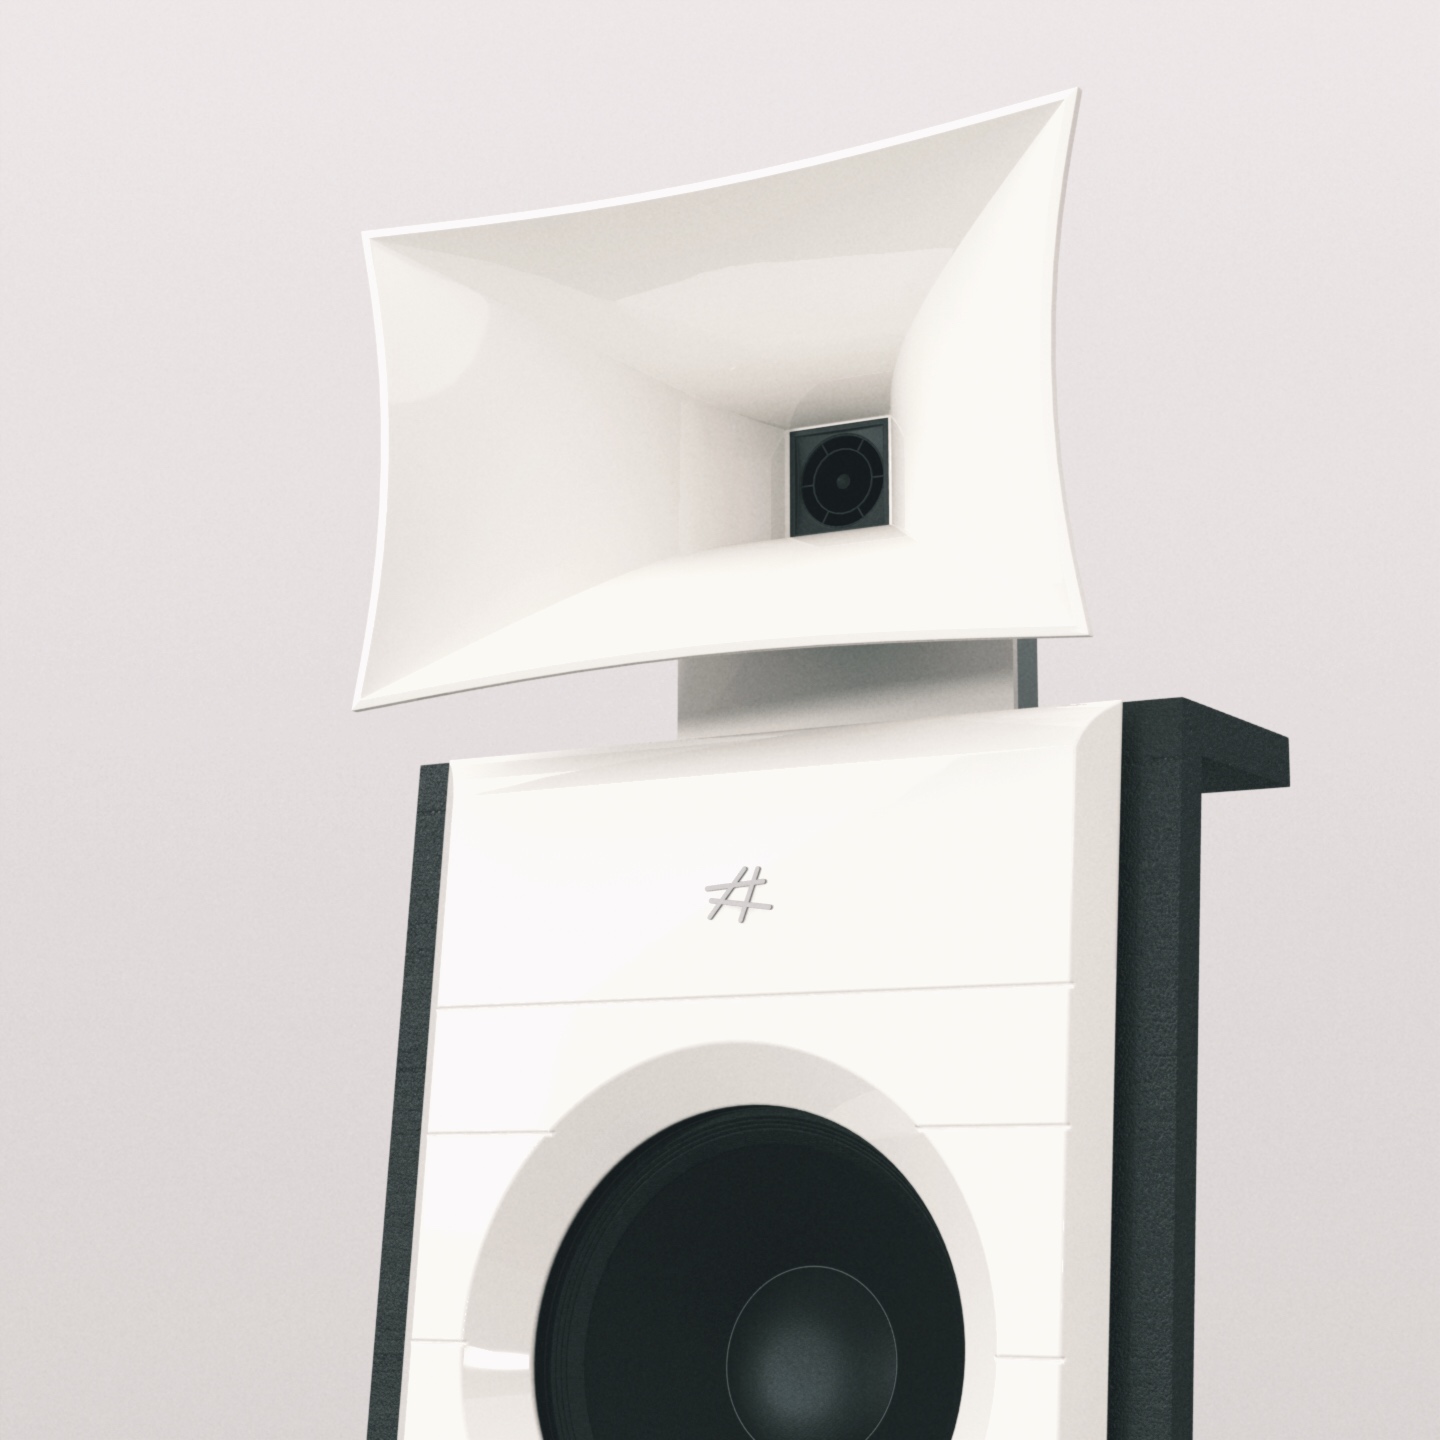 Commercial illustration in computer graphics 3d. Industrail still life for high fidelity crafted speakers.